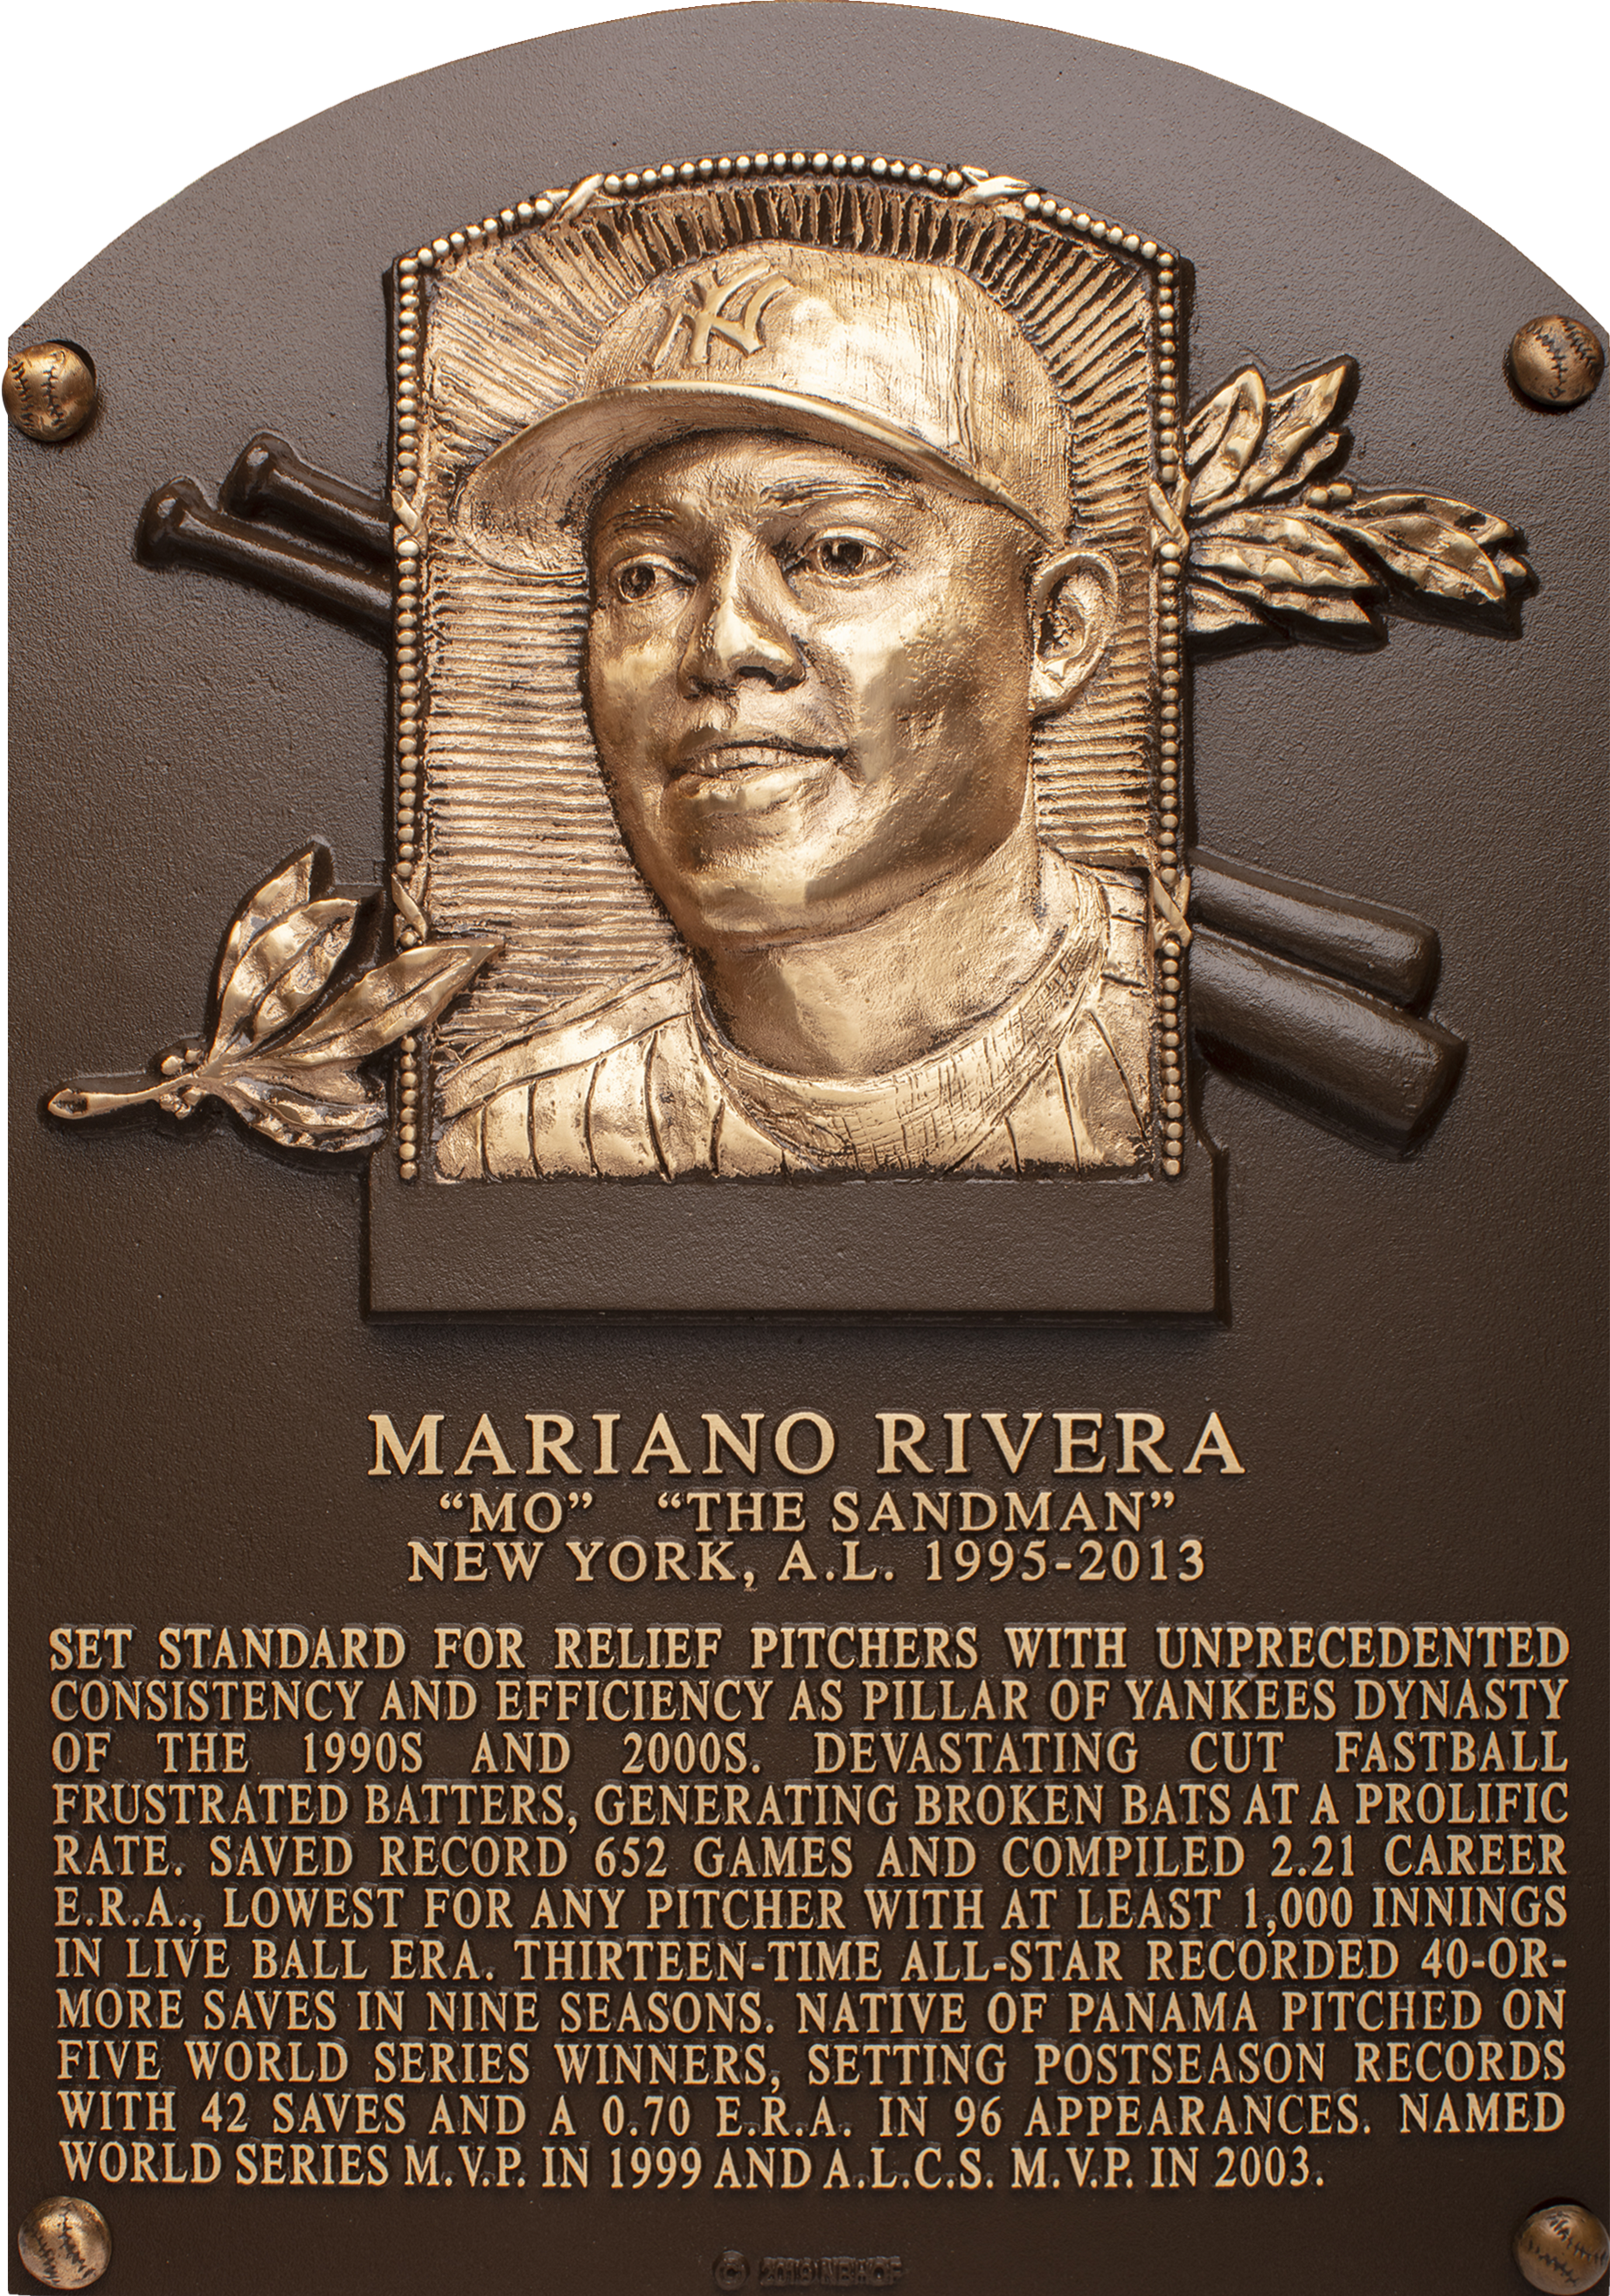 Mariano Rivera Hall of Fame plaque